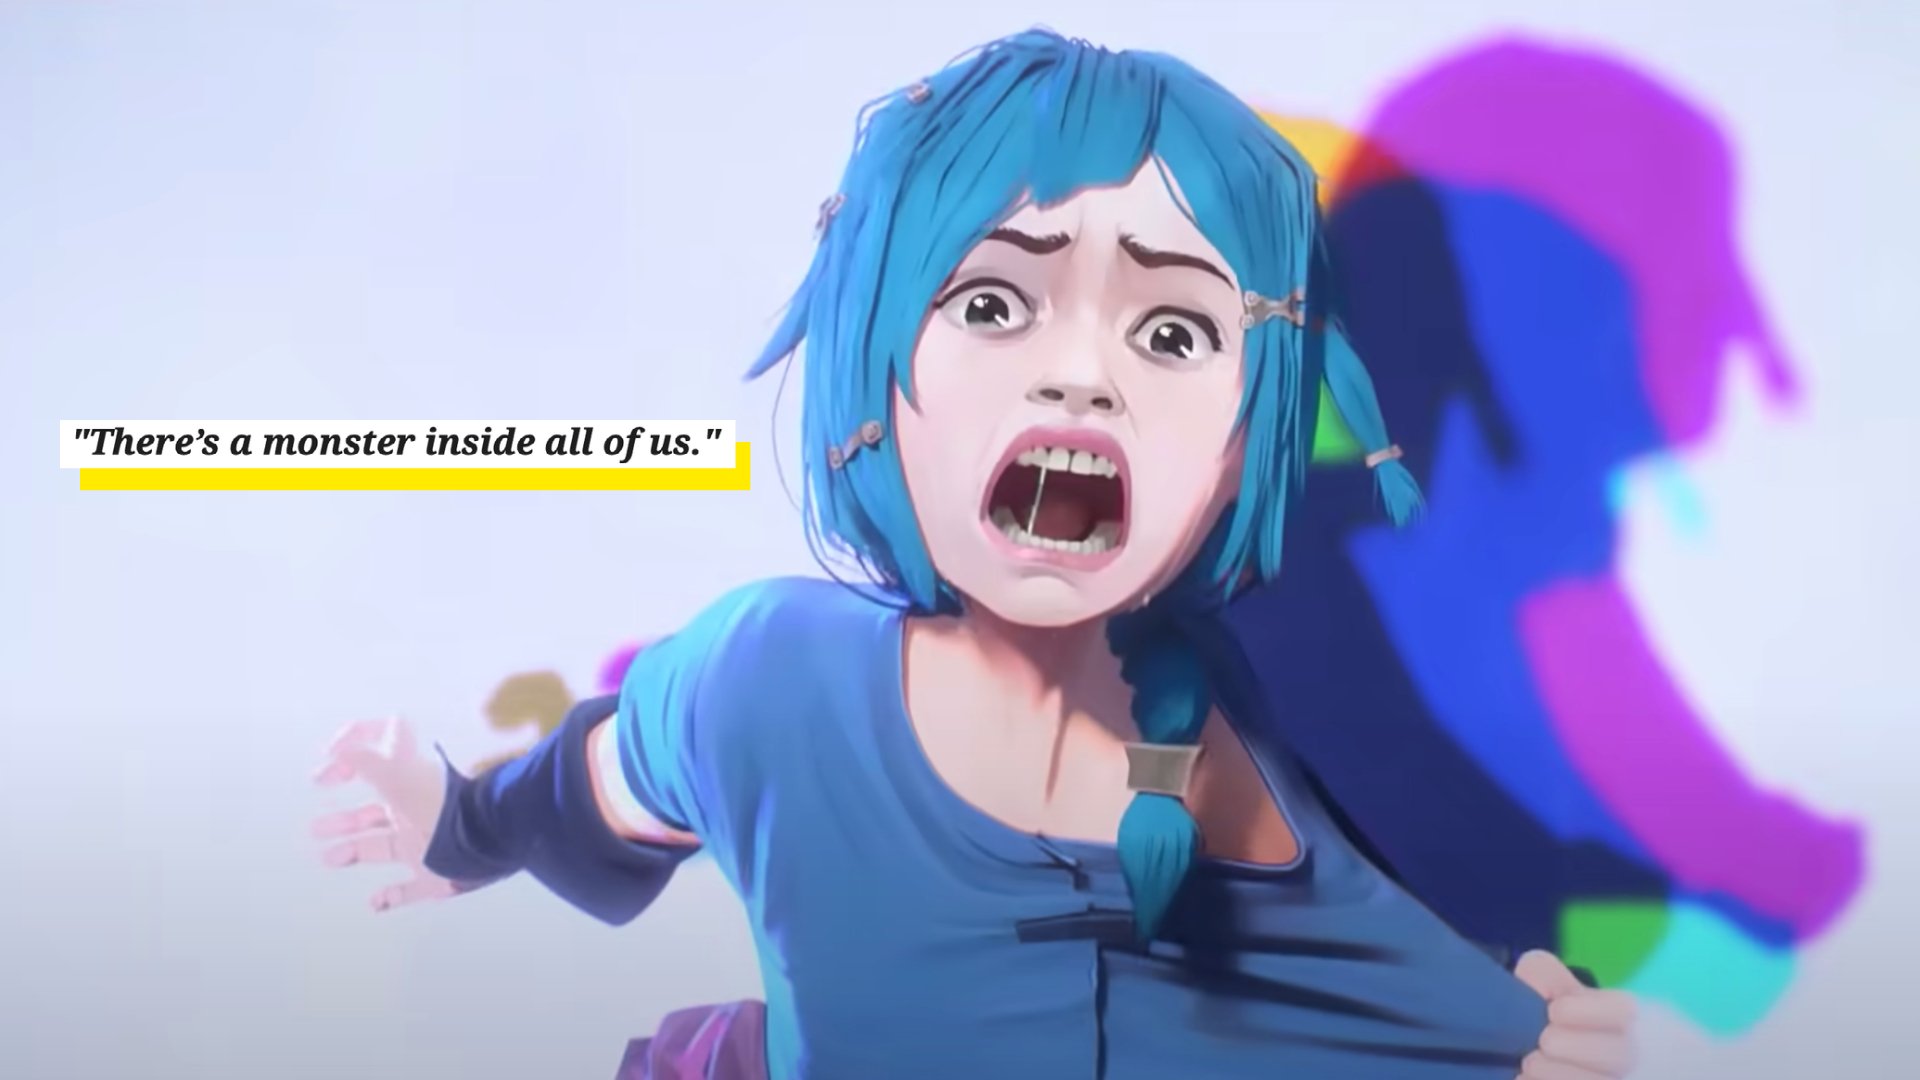 Arcane quotes: The most memorable lines from the Netflix LoL anime